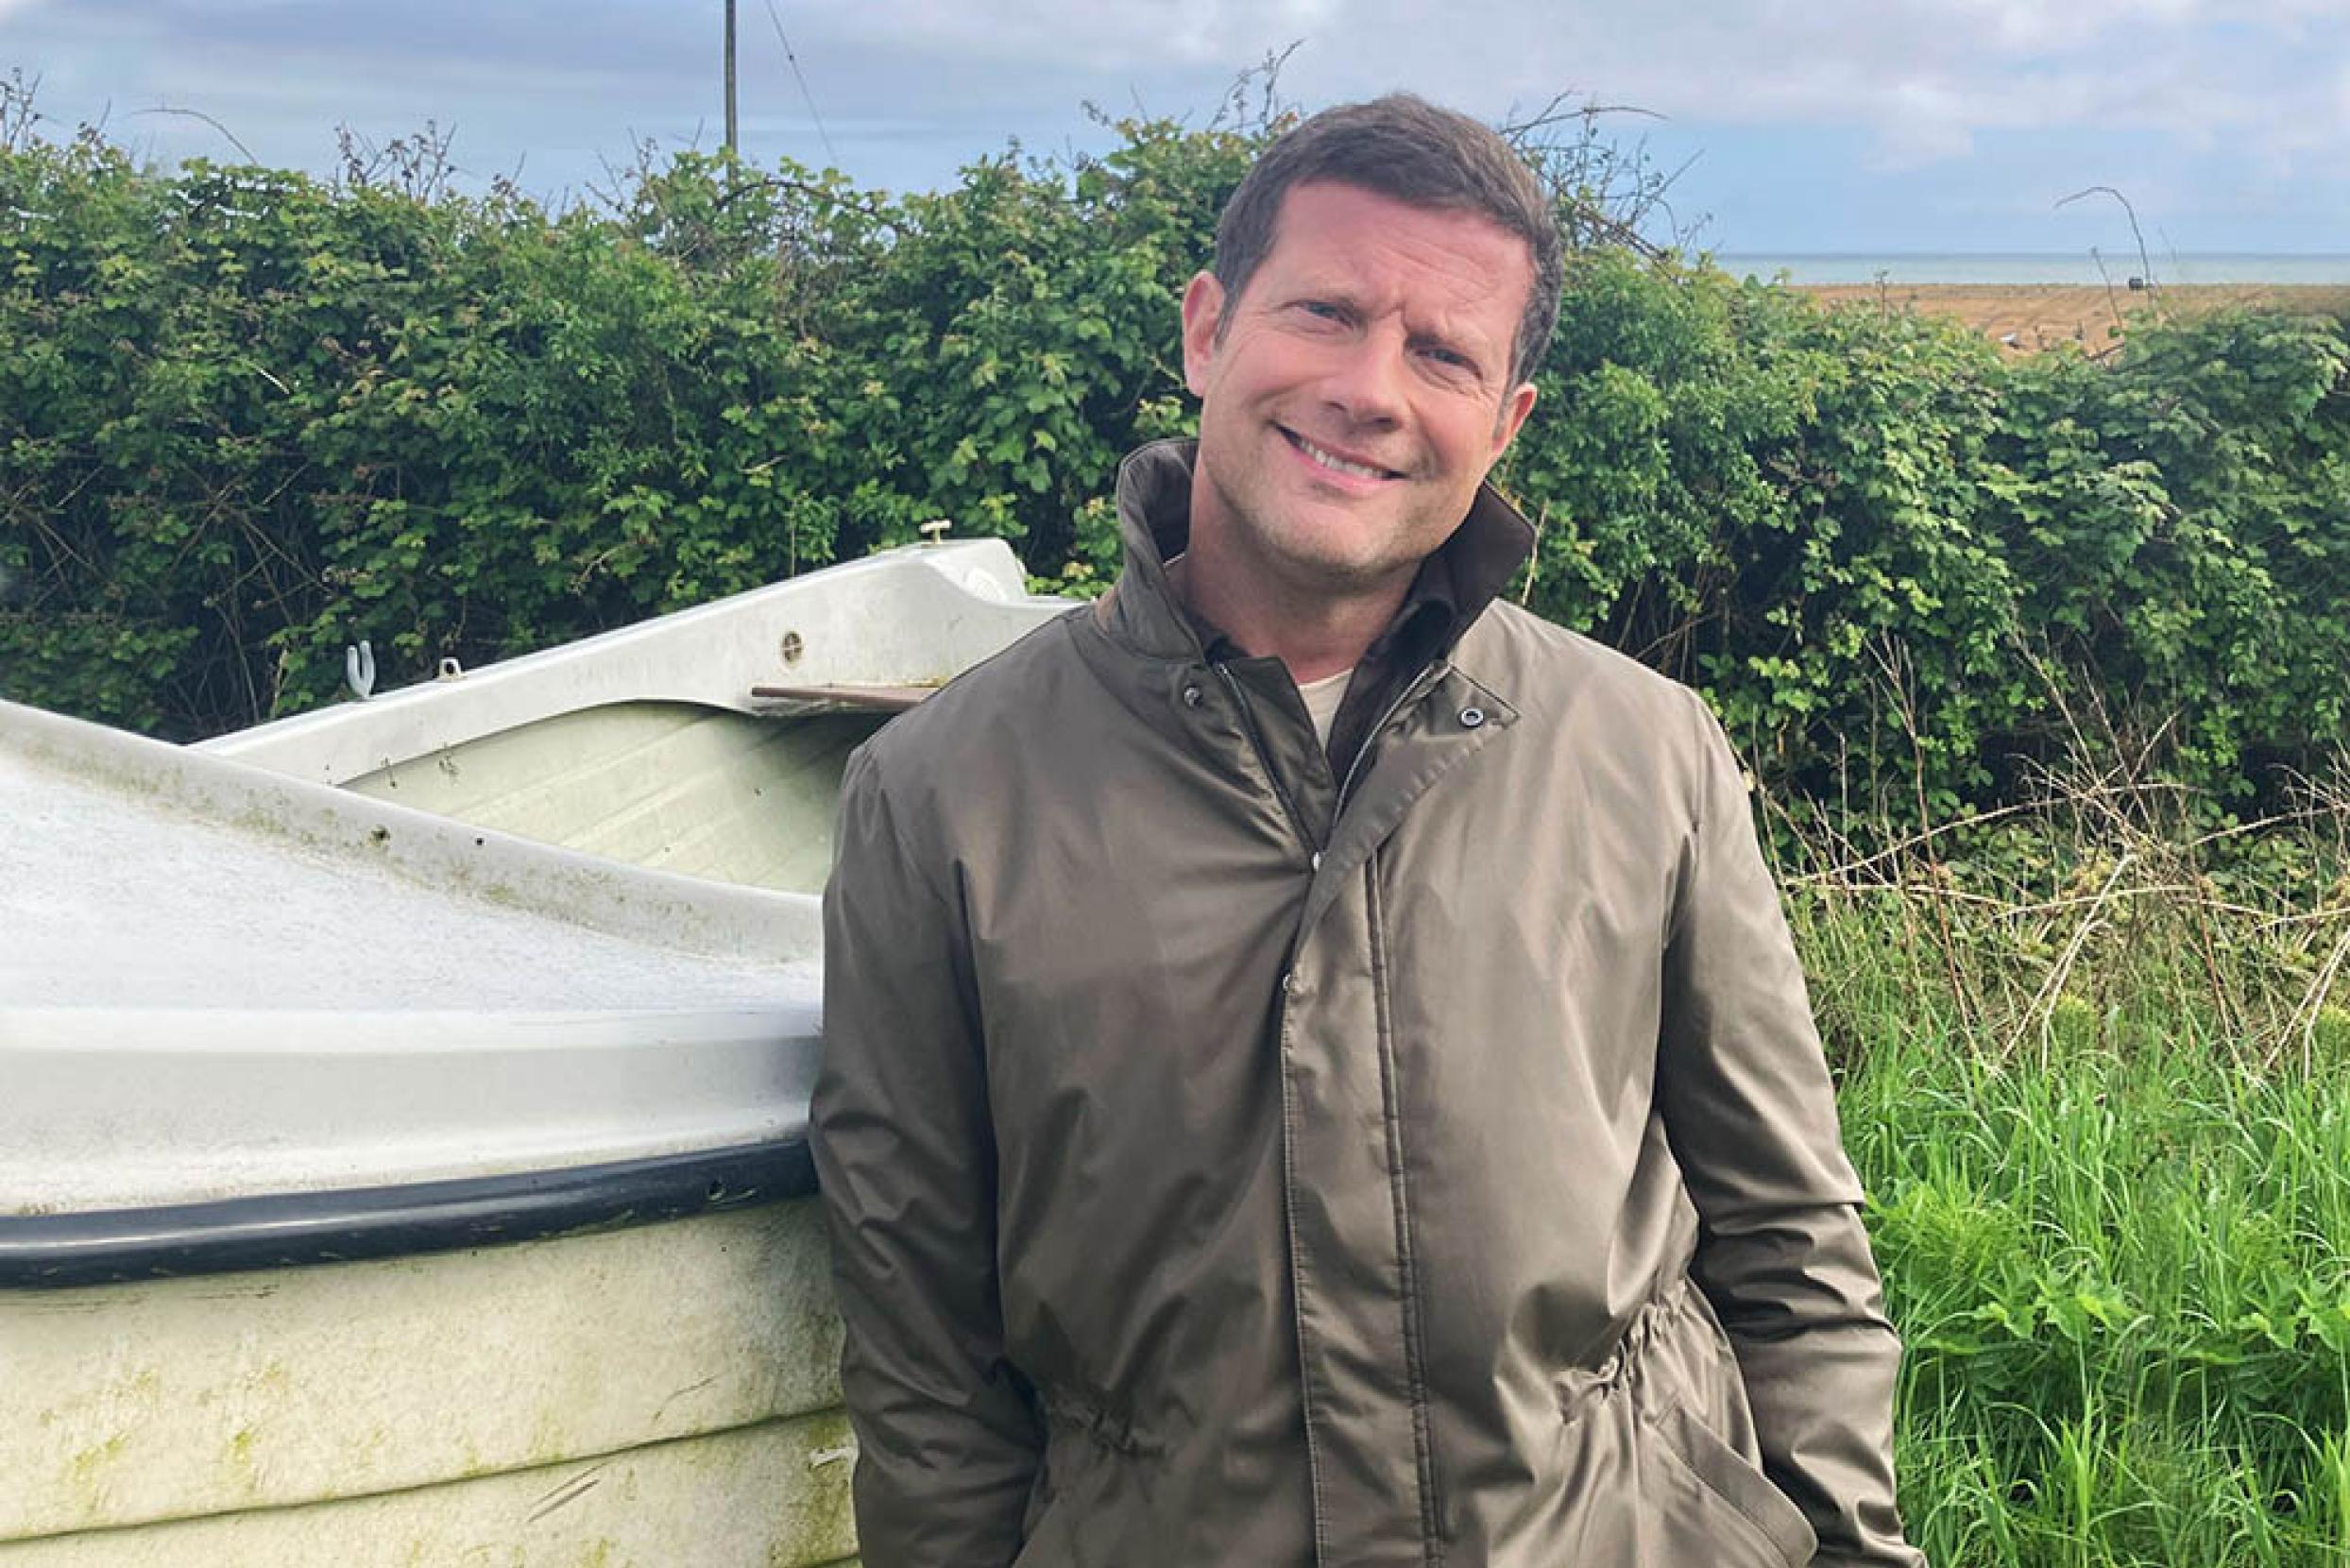 ITV Announces Brand New Food & Travel Series With Dermot O’Leary